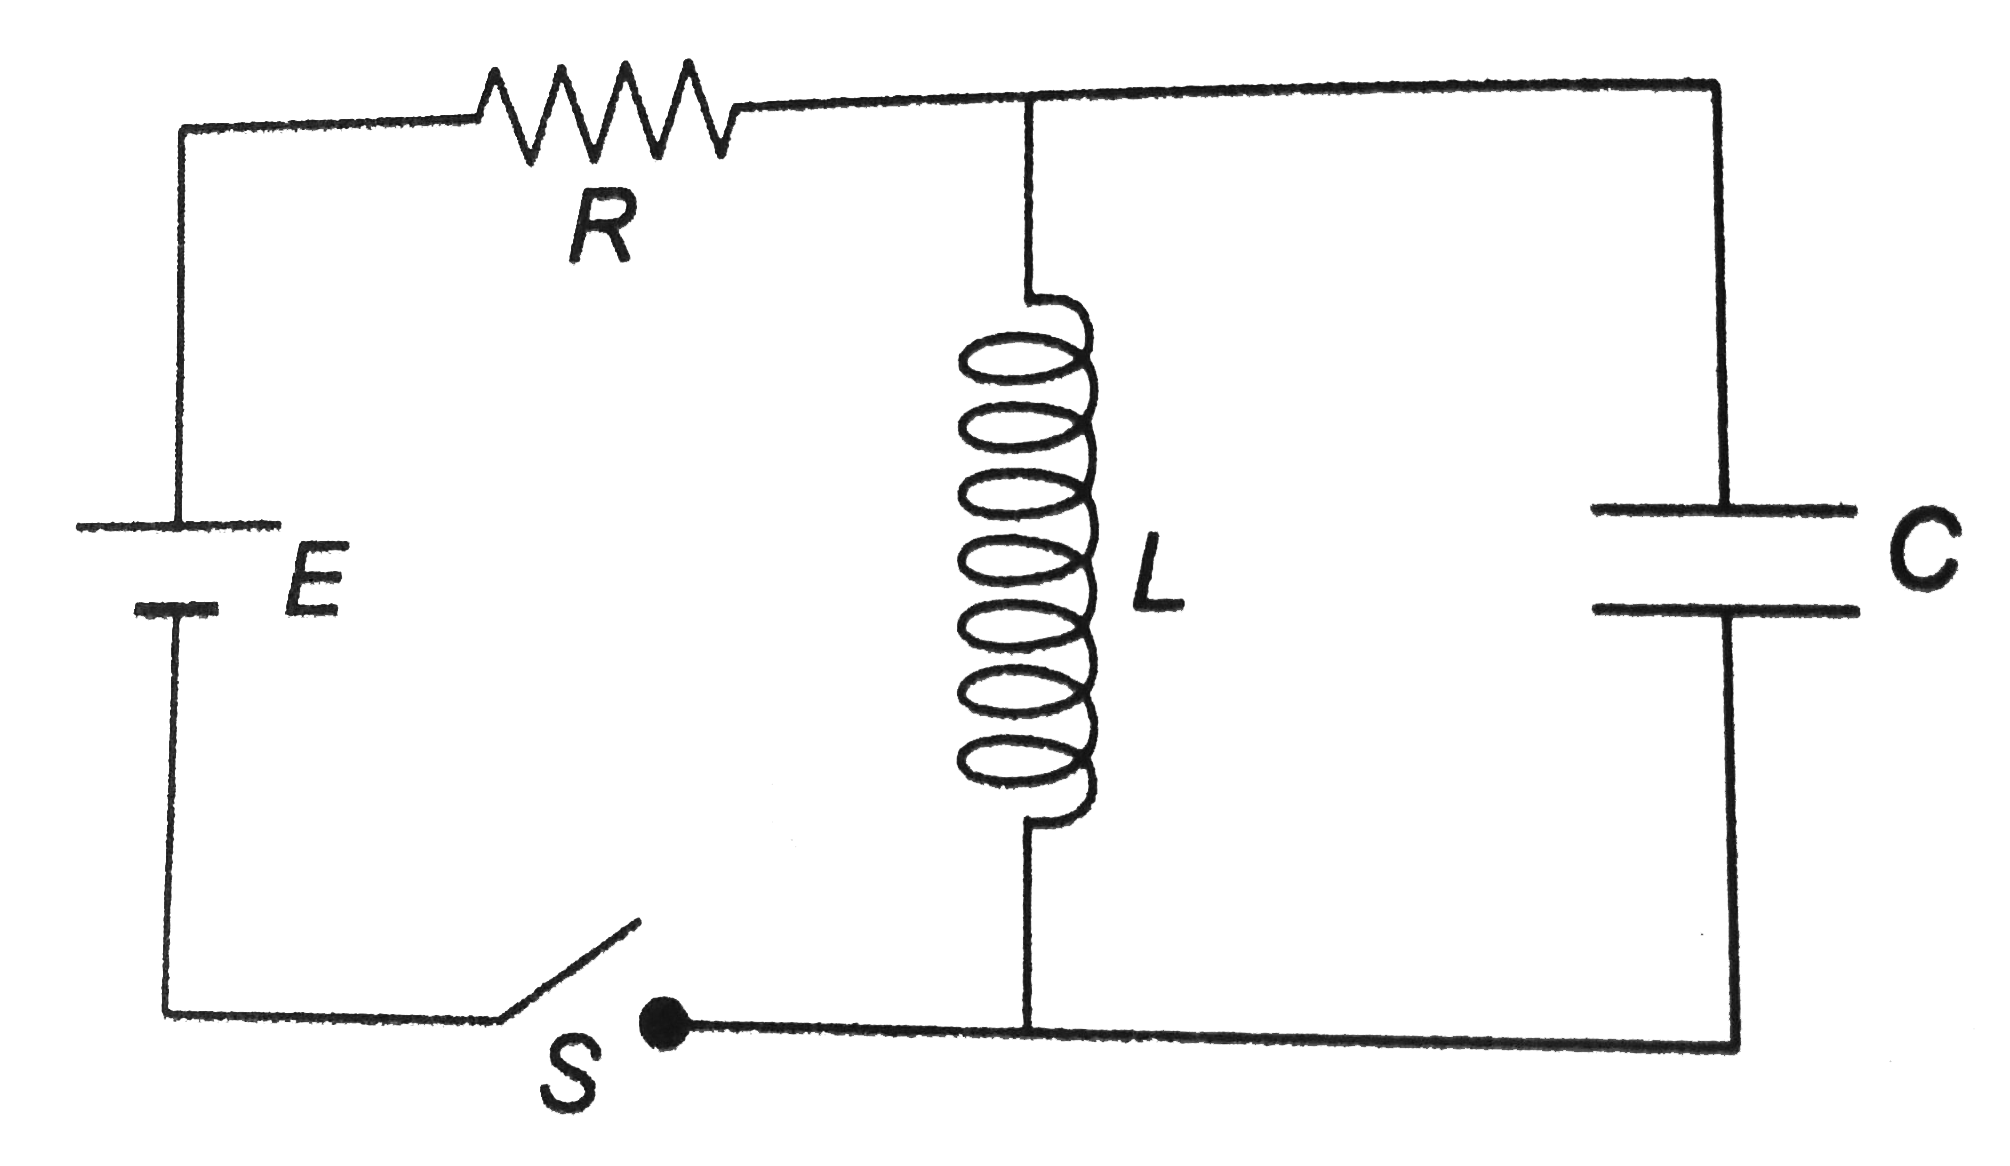 In the circuit shown in the figure, E = 50.0 V, R = 250 Omega and C = 0.500 muF. The switch S is closed for a long time, and no voltage is measured across the capacitor. After the switch is opened, the voltage across the capacitor reaches a maximum value of 150 V. What is the inductance L?